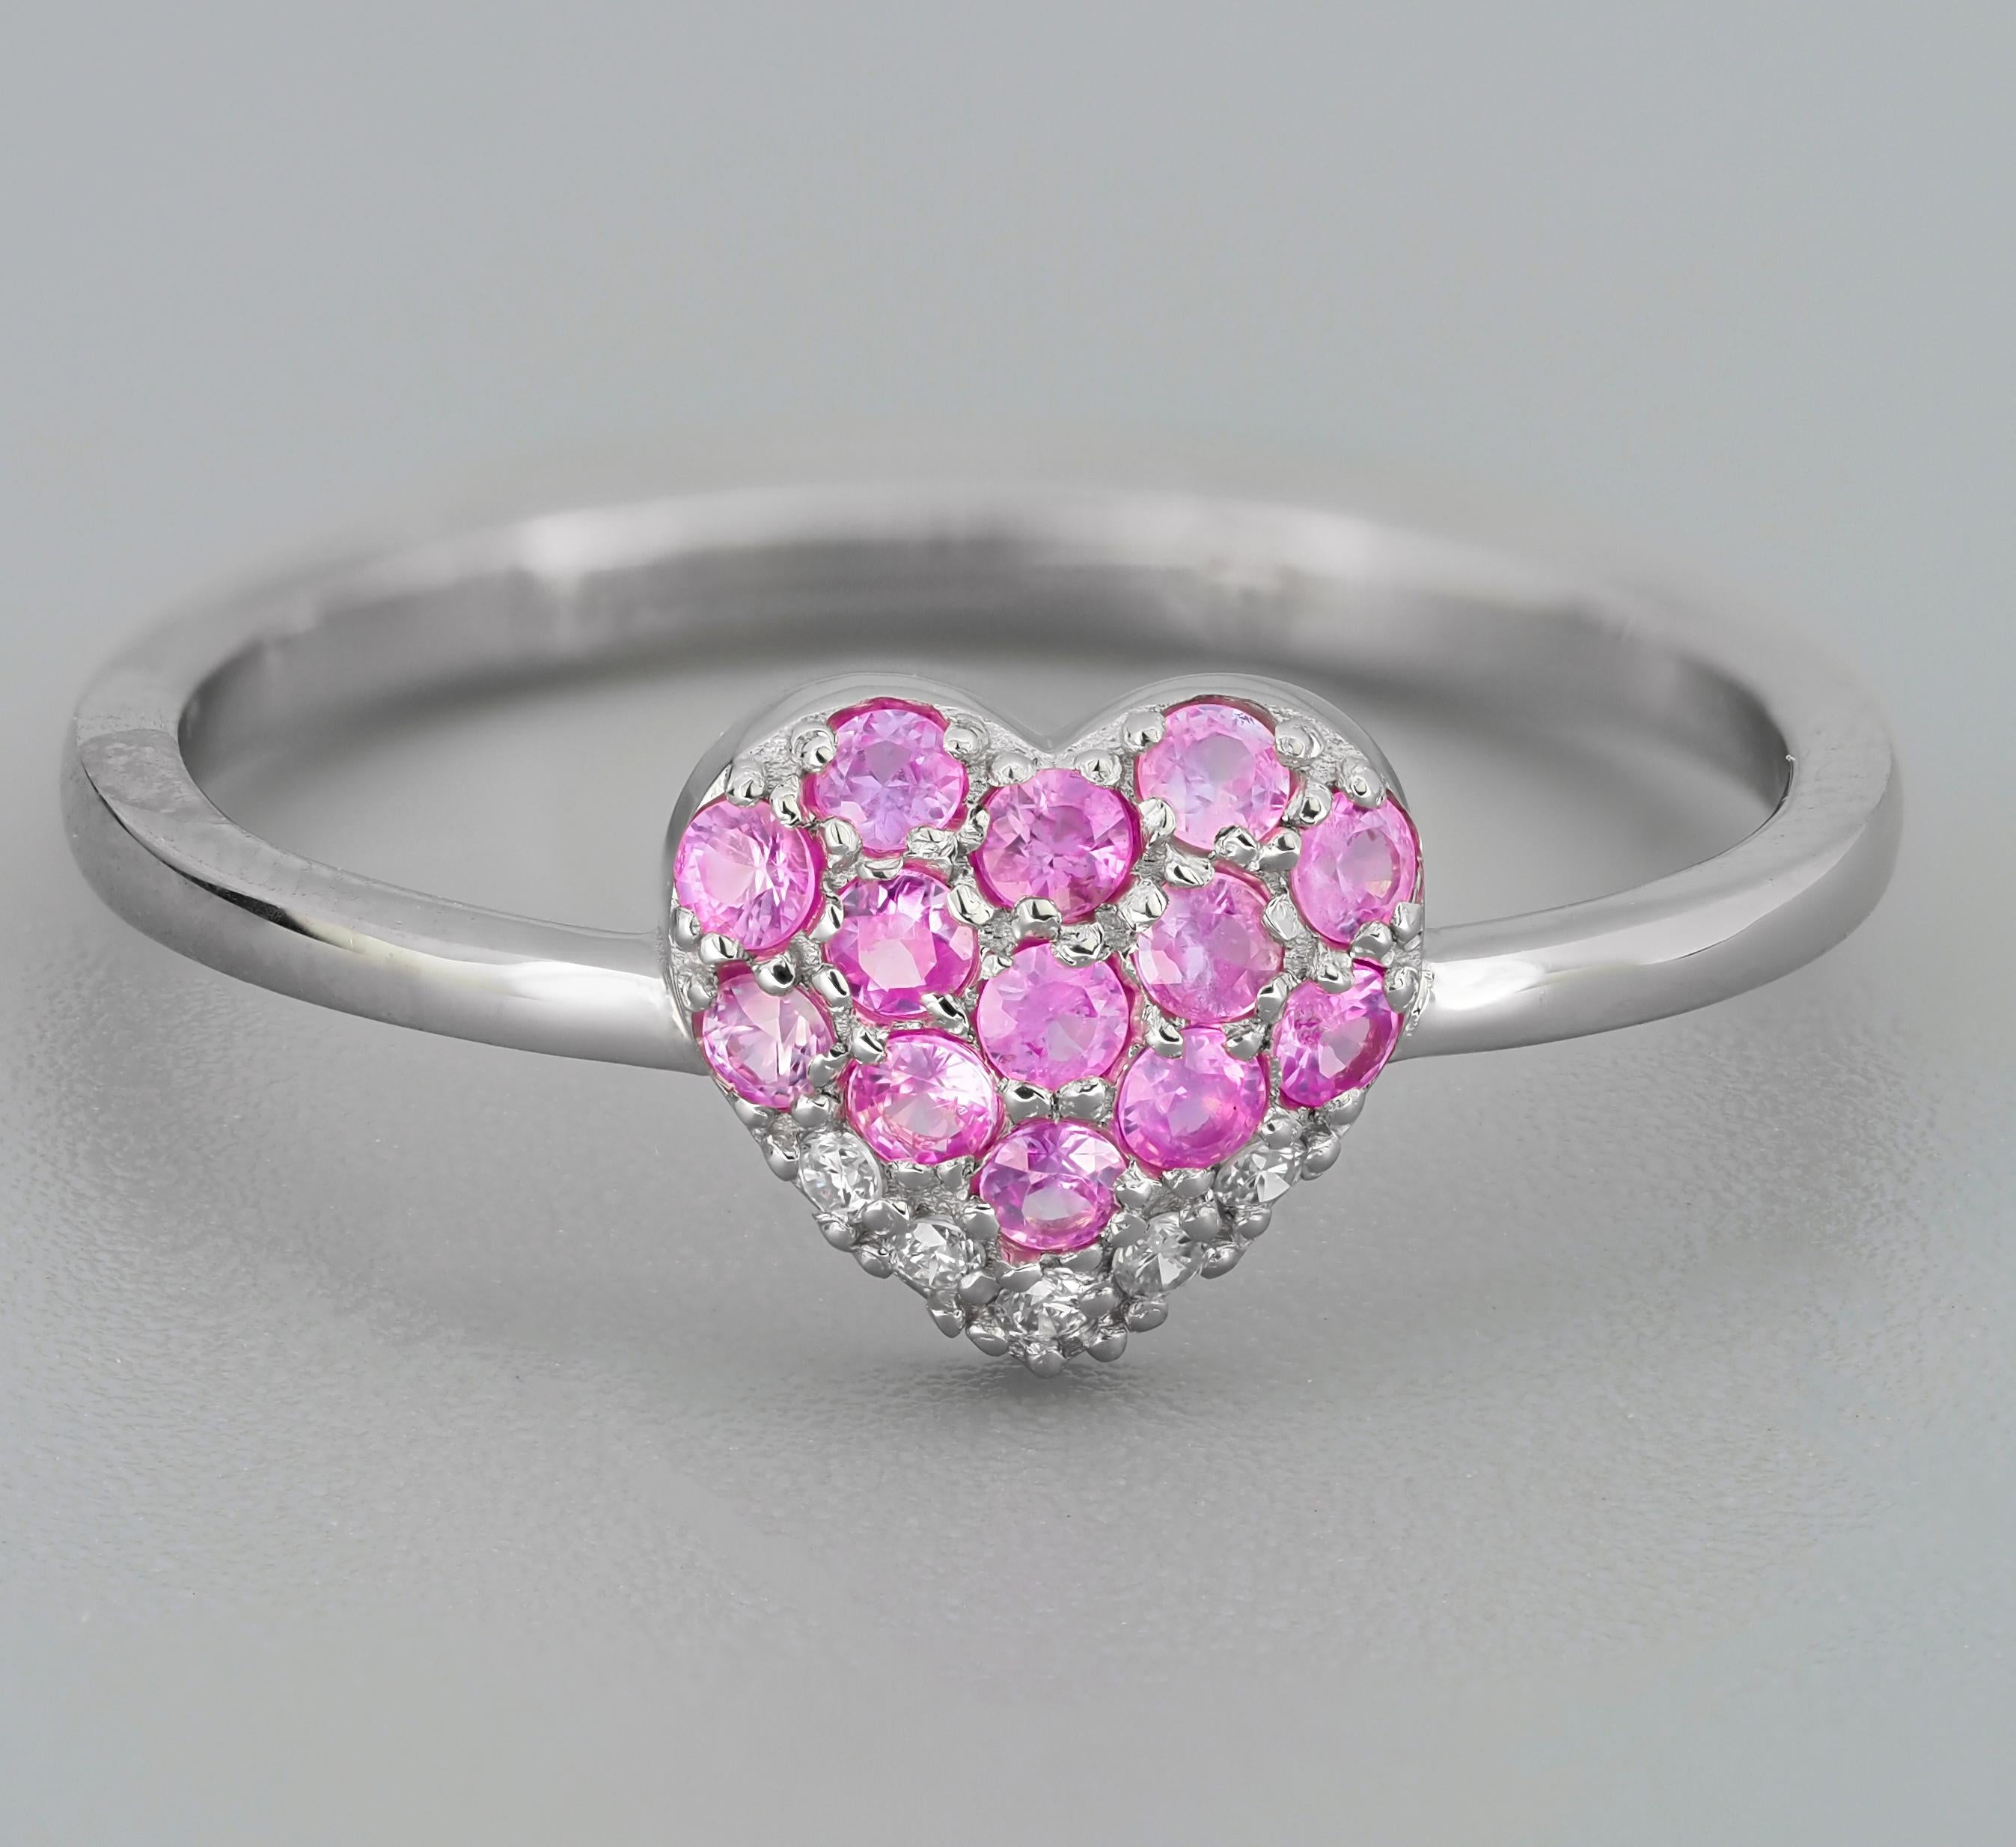 For Sale:  Heart Shaped Gold Ring with Pink Sapphires 8